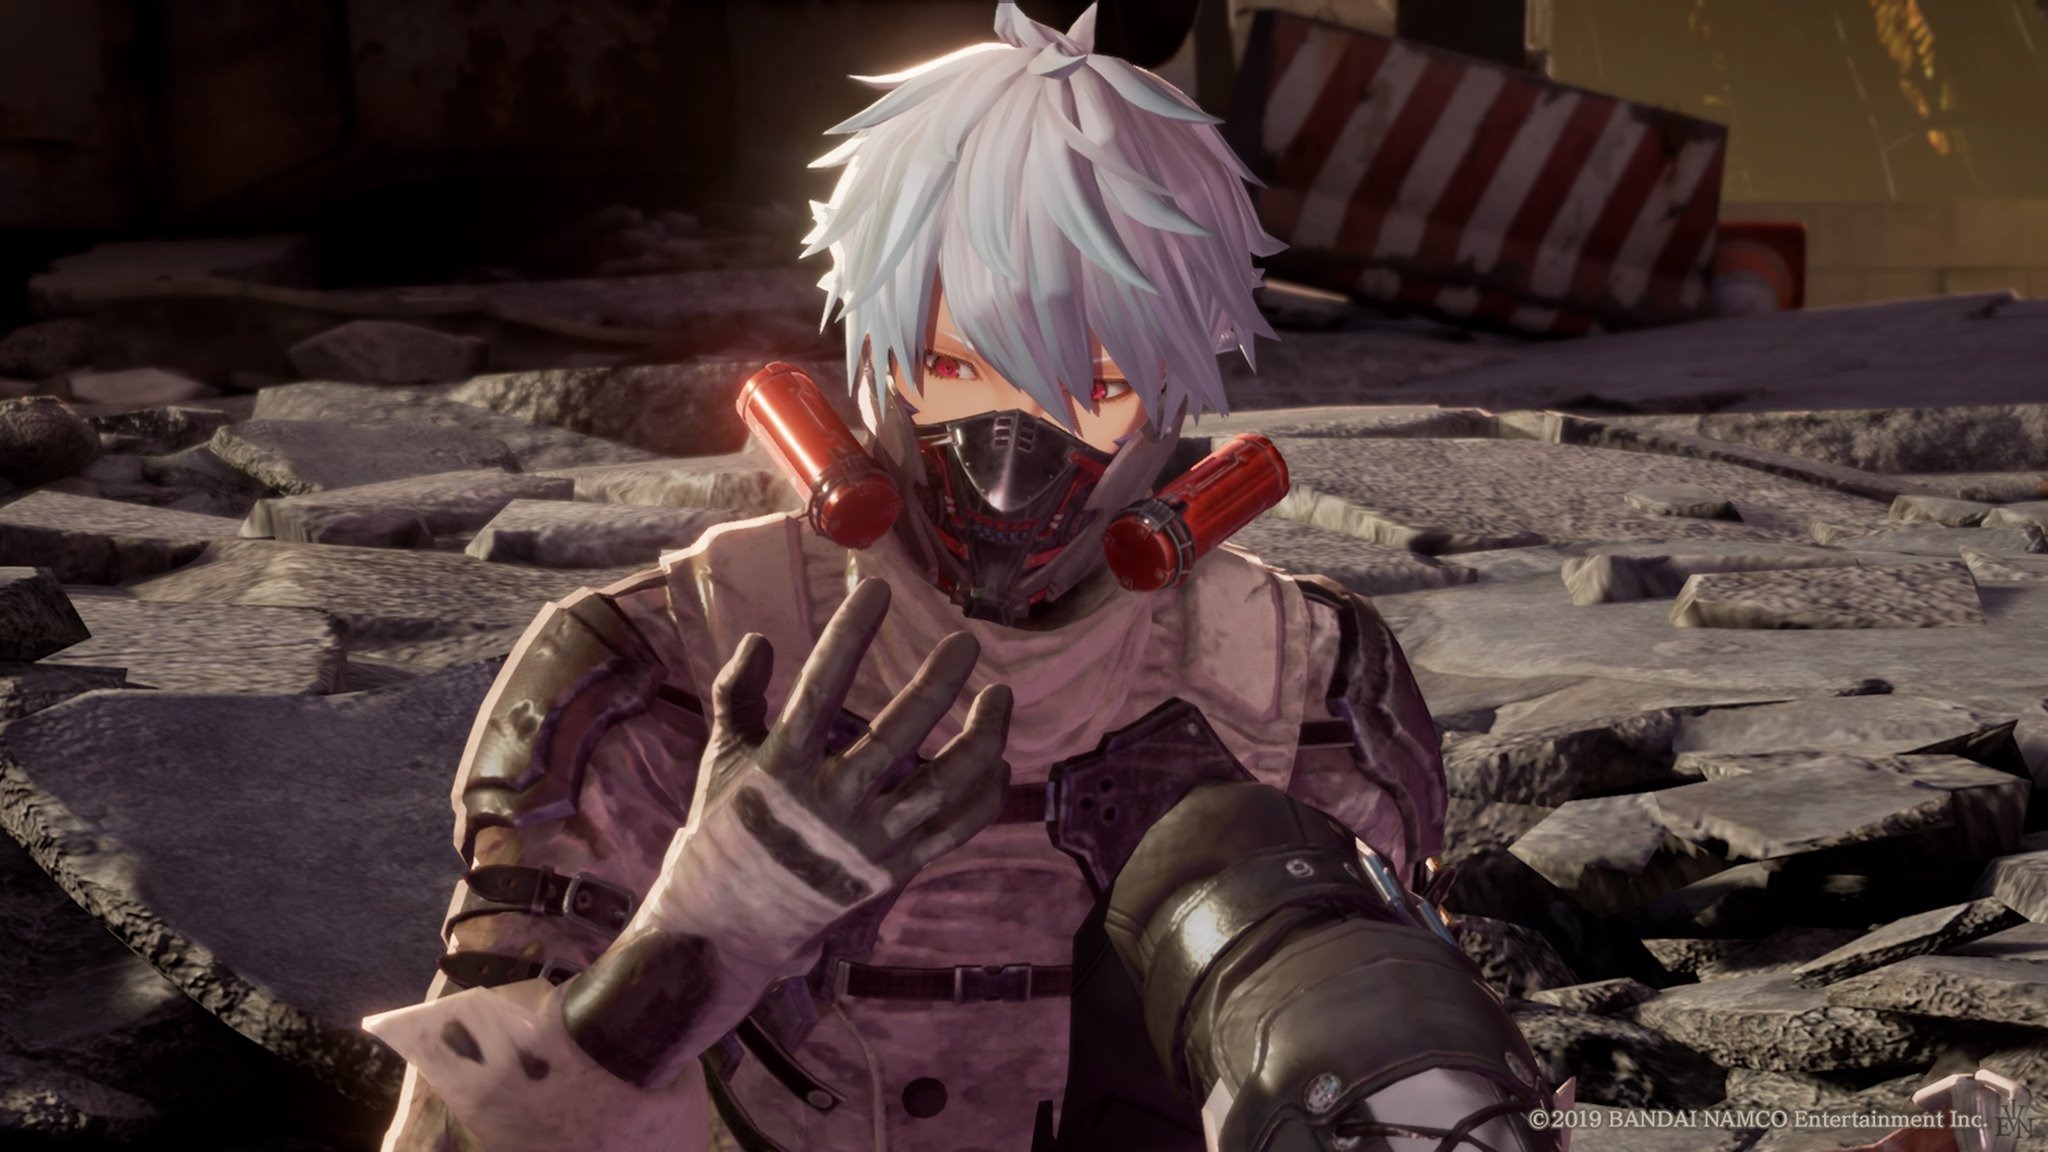 Code Vein' is coming out in September, a year after it was promised